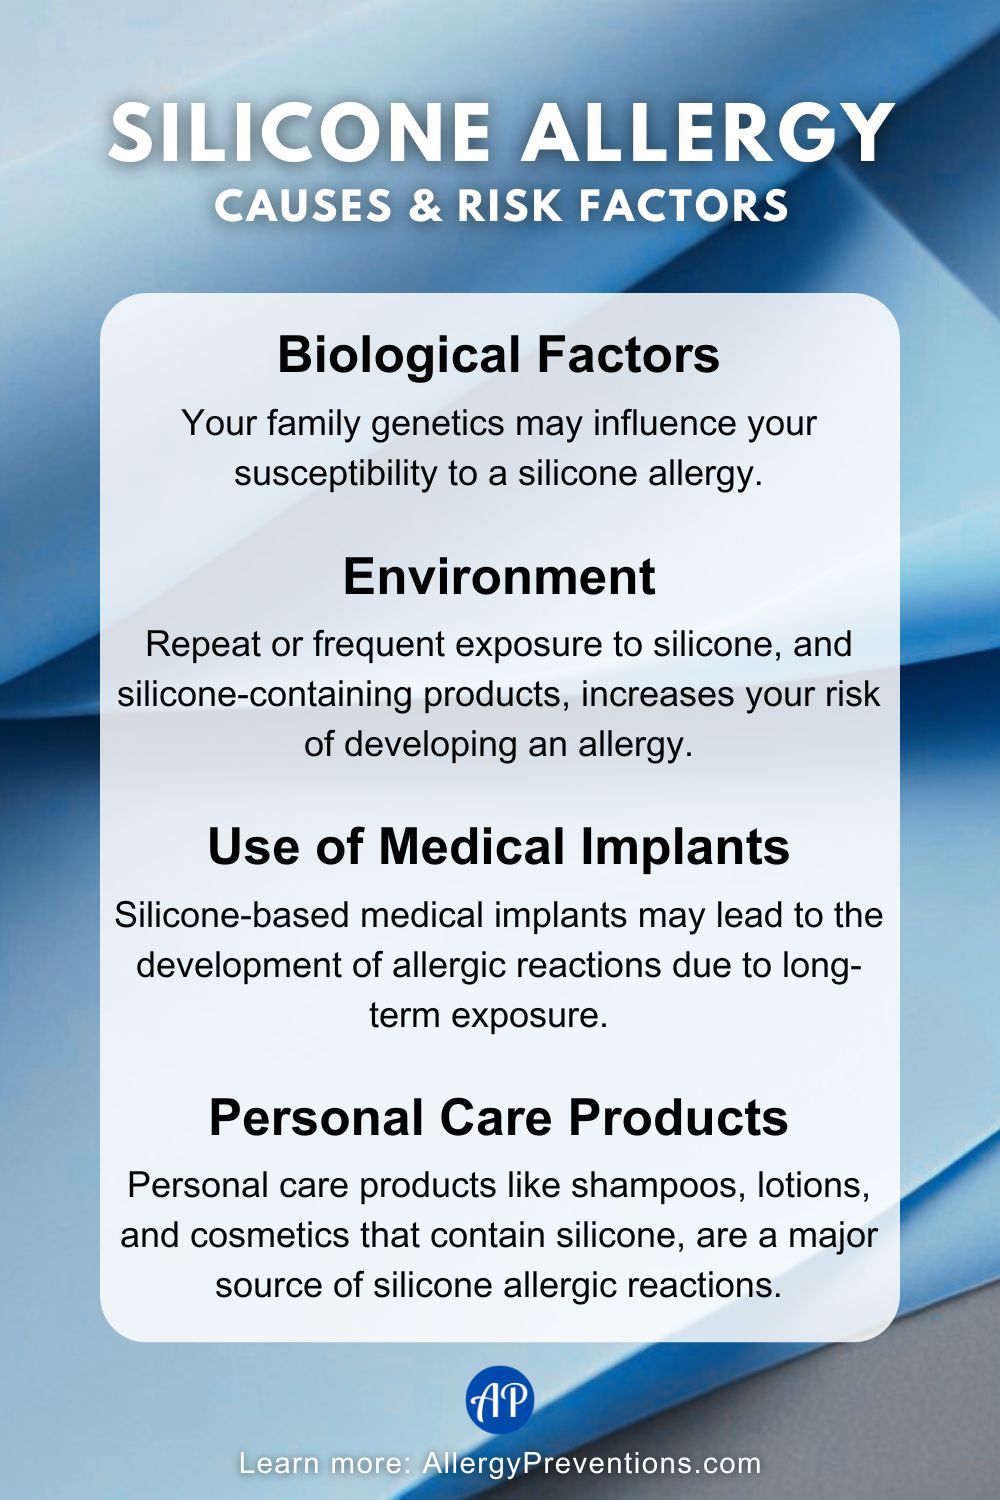 silicone allergy Causes & Risk Factors Infographic. Biological Factors: Your family genetics may influence your susceptibility to a silicone allergy. Environment: Repeat or frequent exposure to silicone, and silicone-containing products, increases your risk of developing an allergy. Use of Medical Implants: Silicone-based medical implants may lead to the development of allergic reactions due to long-term exposure. Personal Care Products: Personal care products like shampoos, lotions, and cosmetics that contain silicone, are a major source of silicone allergic reactions.